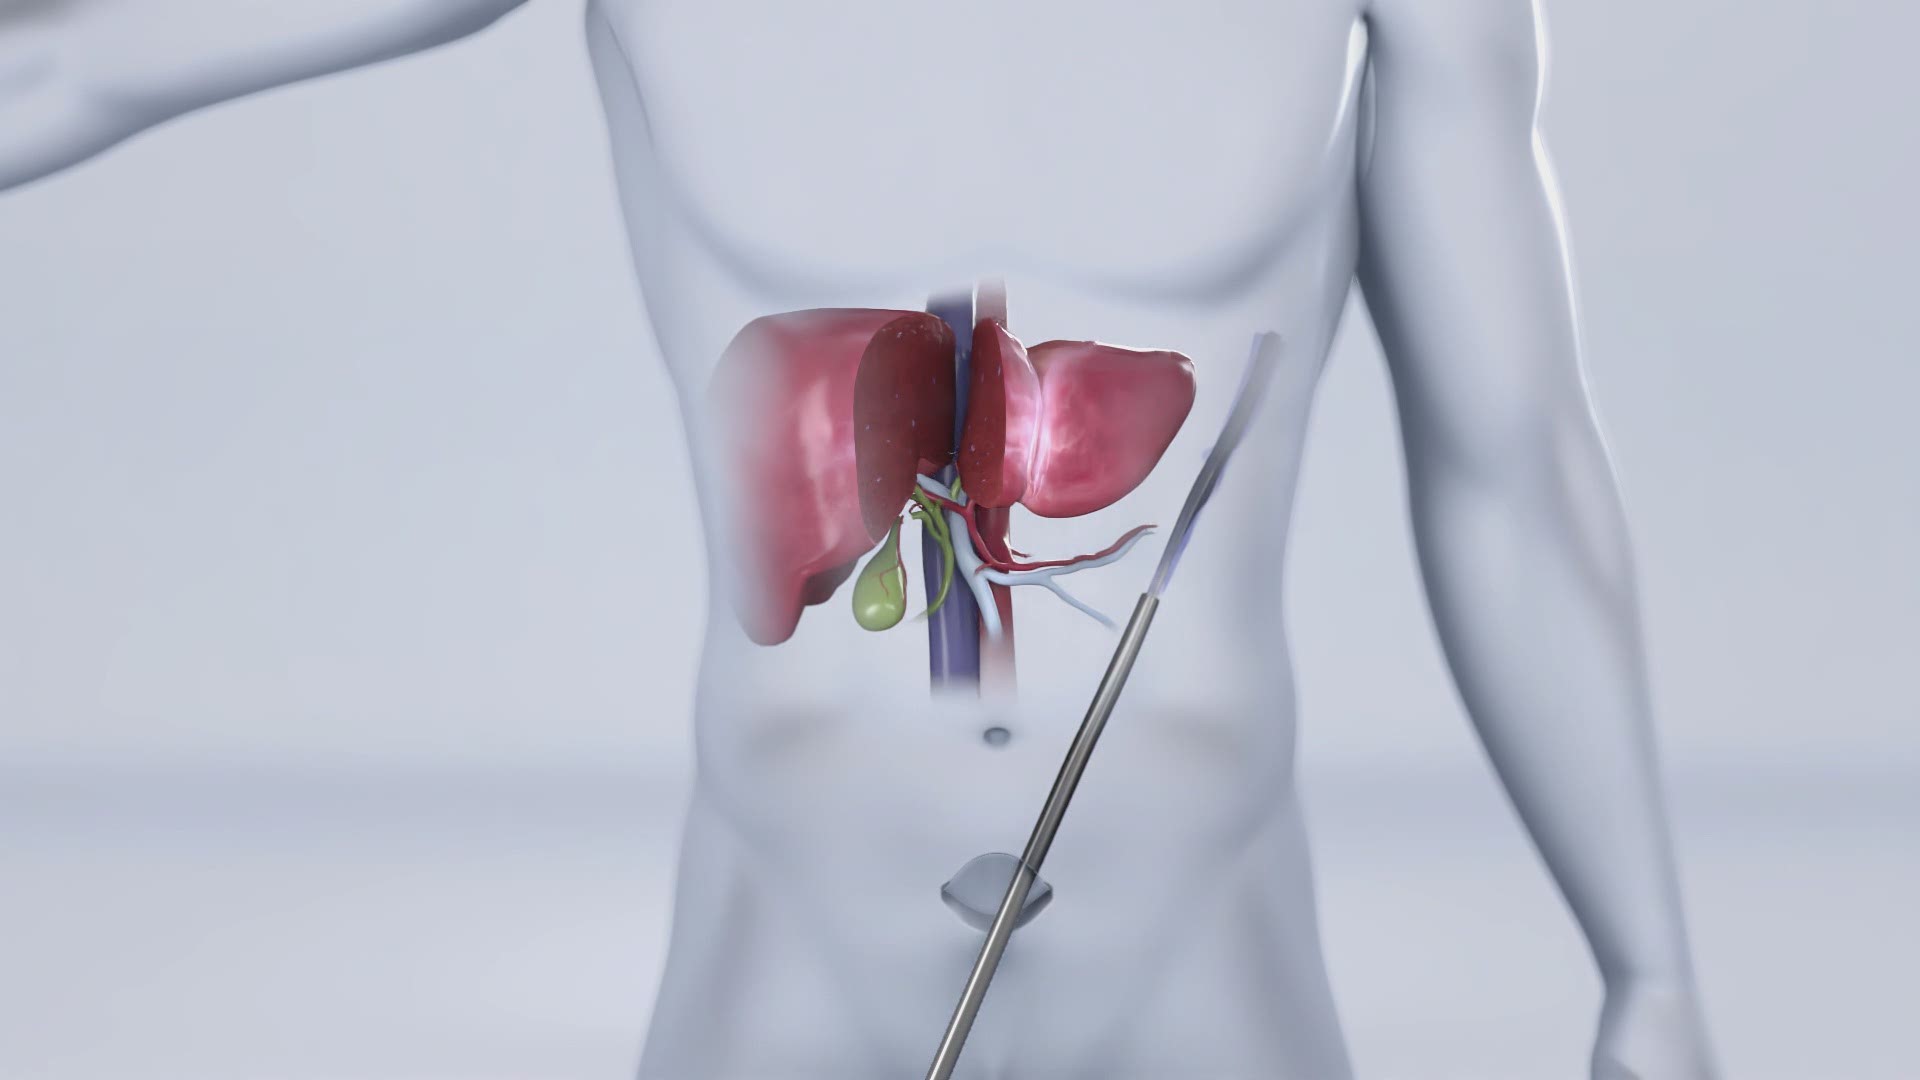 The Cleveland Clinic has achieved another medical advancement by successfully performing their first purely laparoscopic living donor surgery for liver transplant.